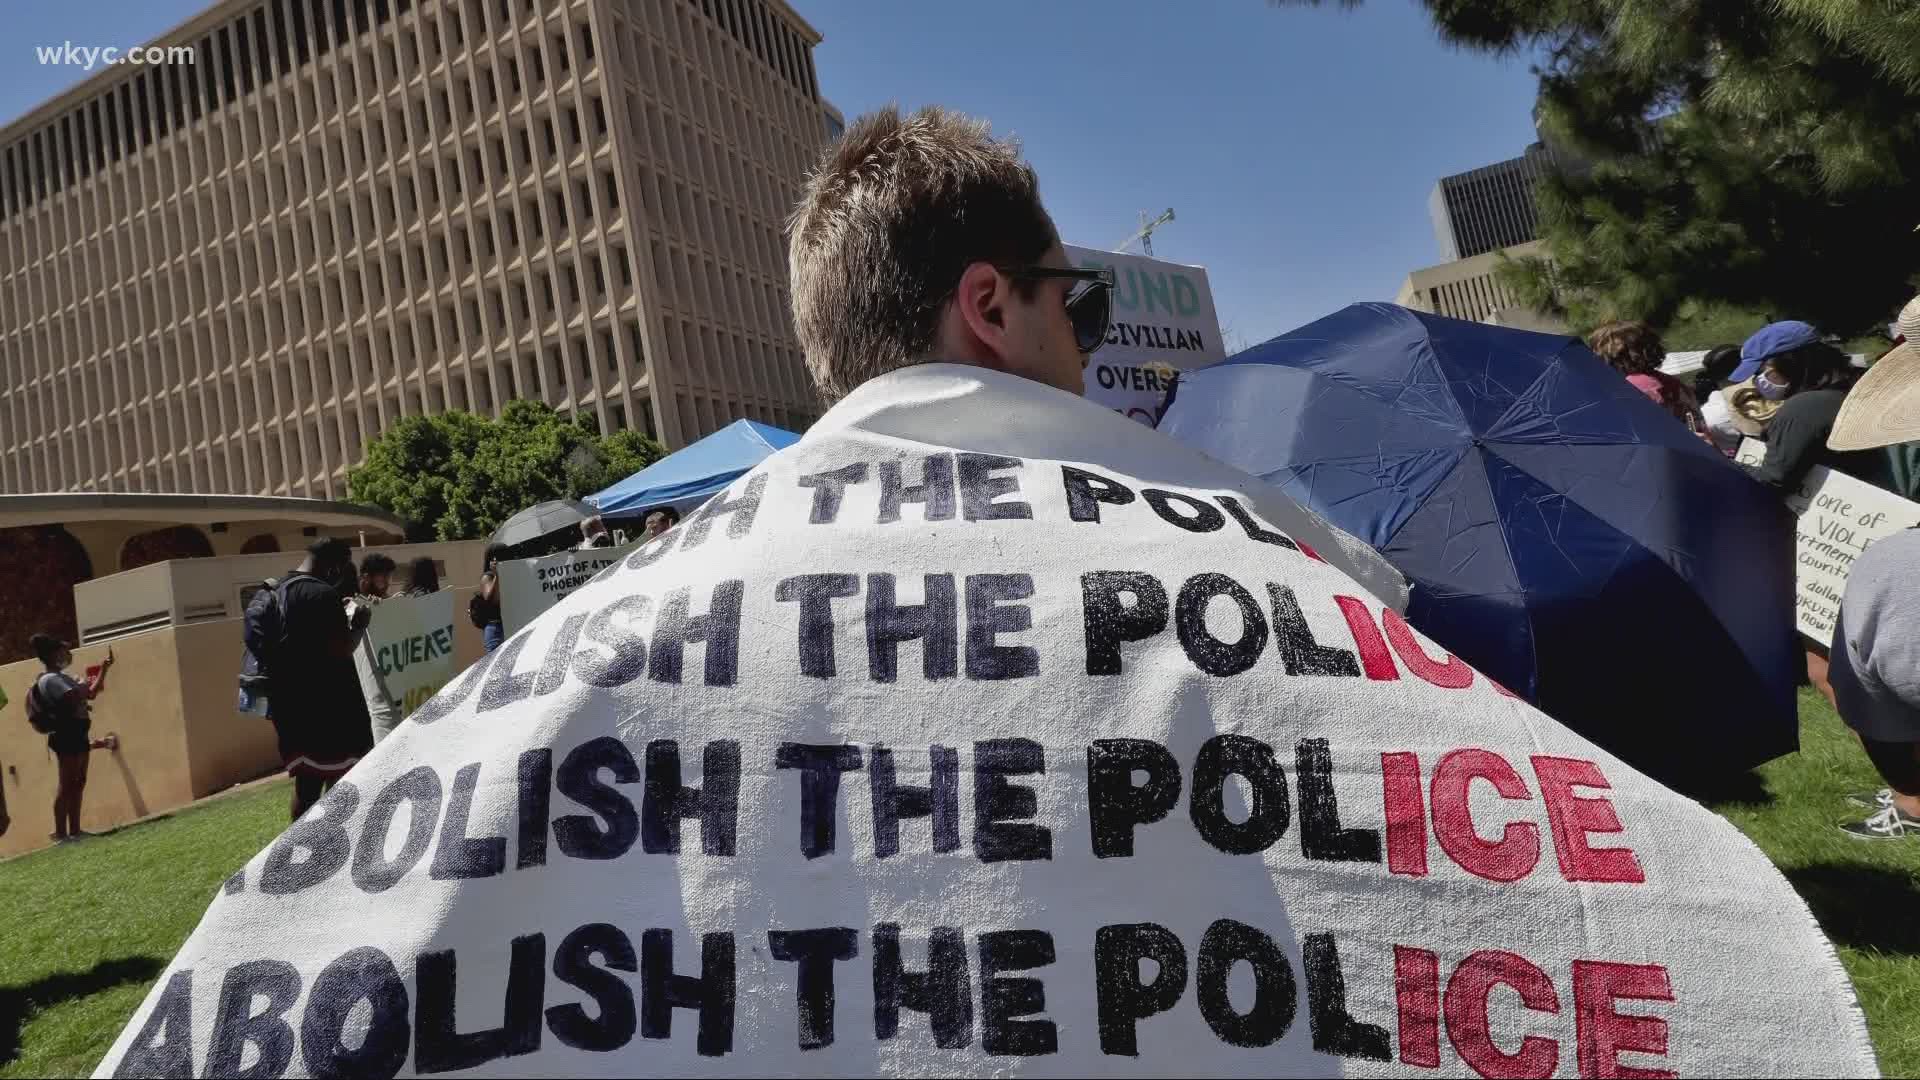 Activists say the slogan a range of meanings, including shifting money in the police budget to programs to address economic and social problems. Mark Naymik explains